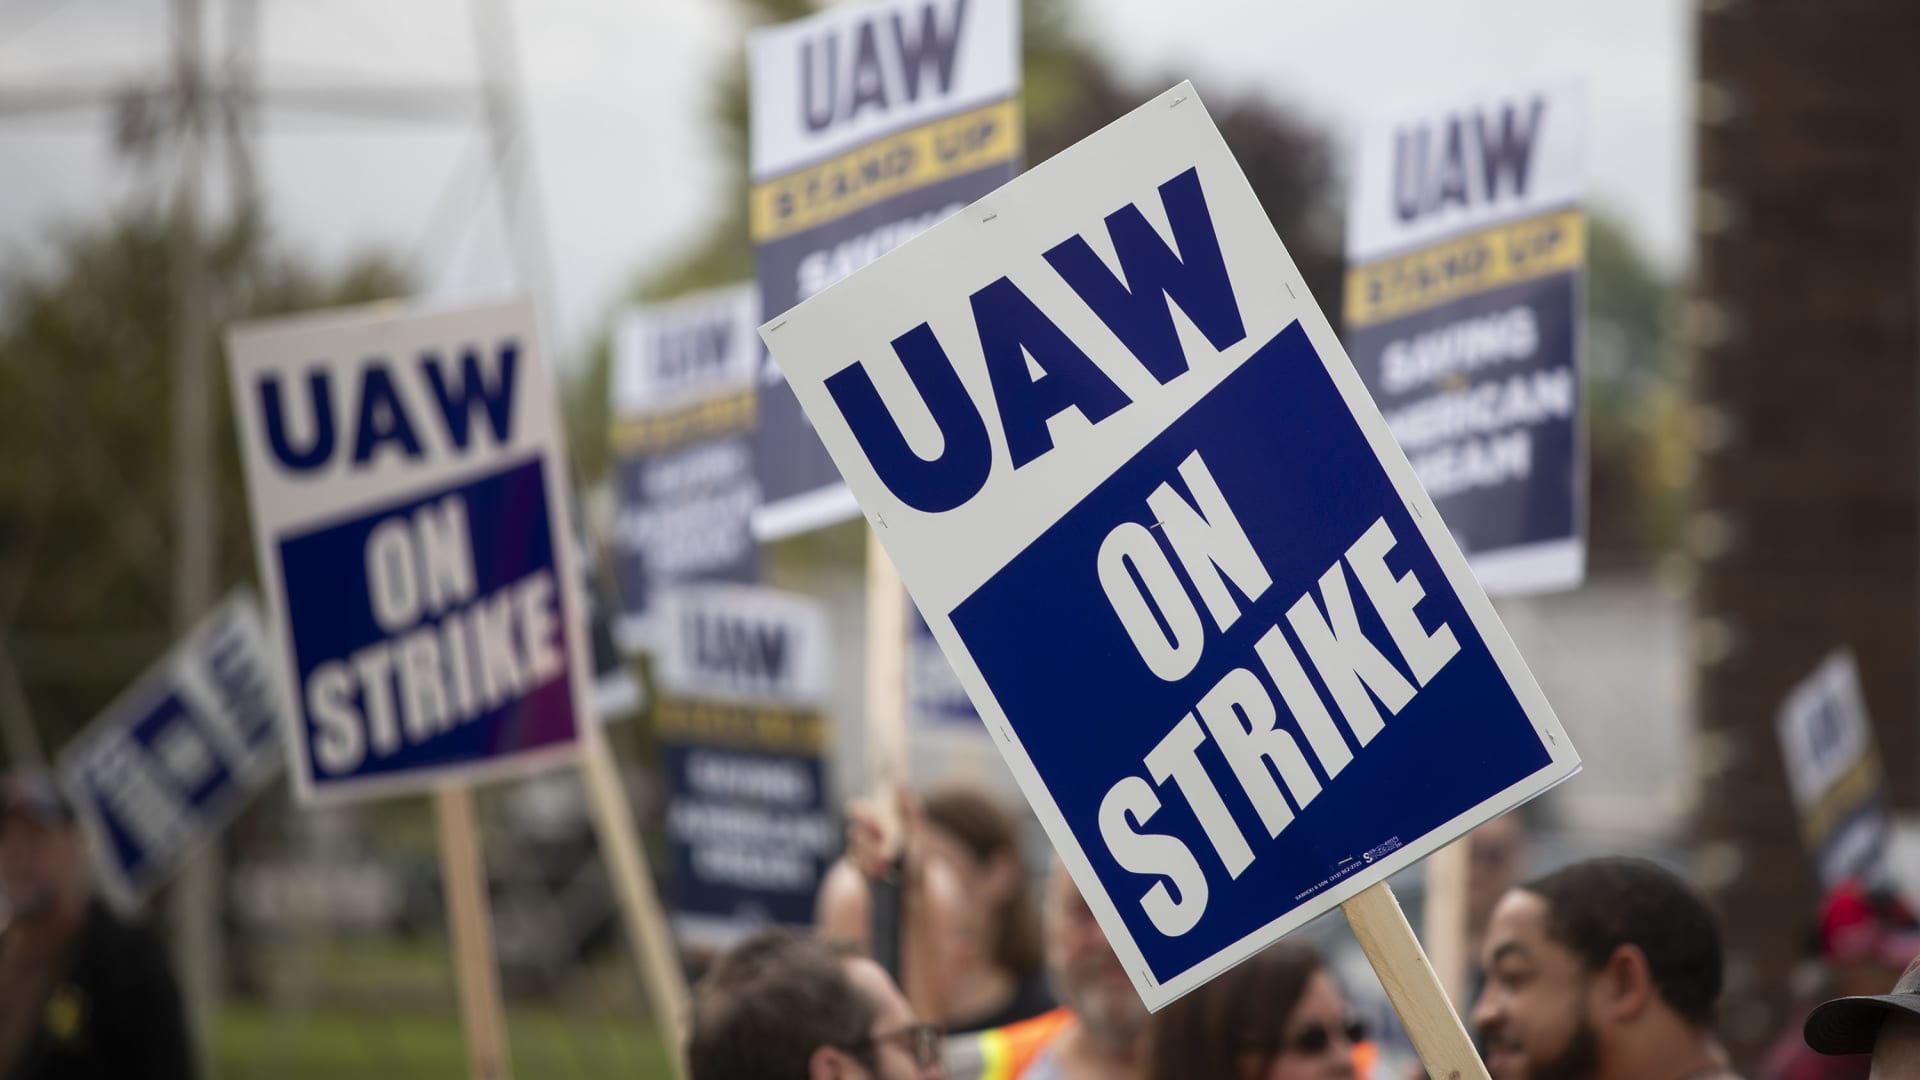 GM union staff ratify UAW deal following contentious vote